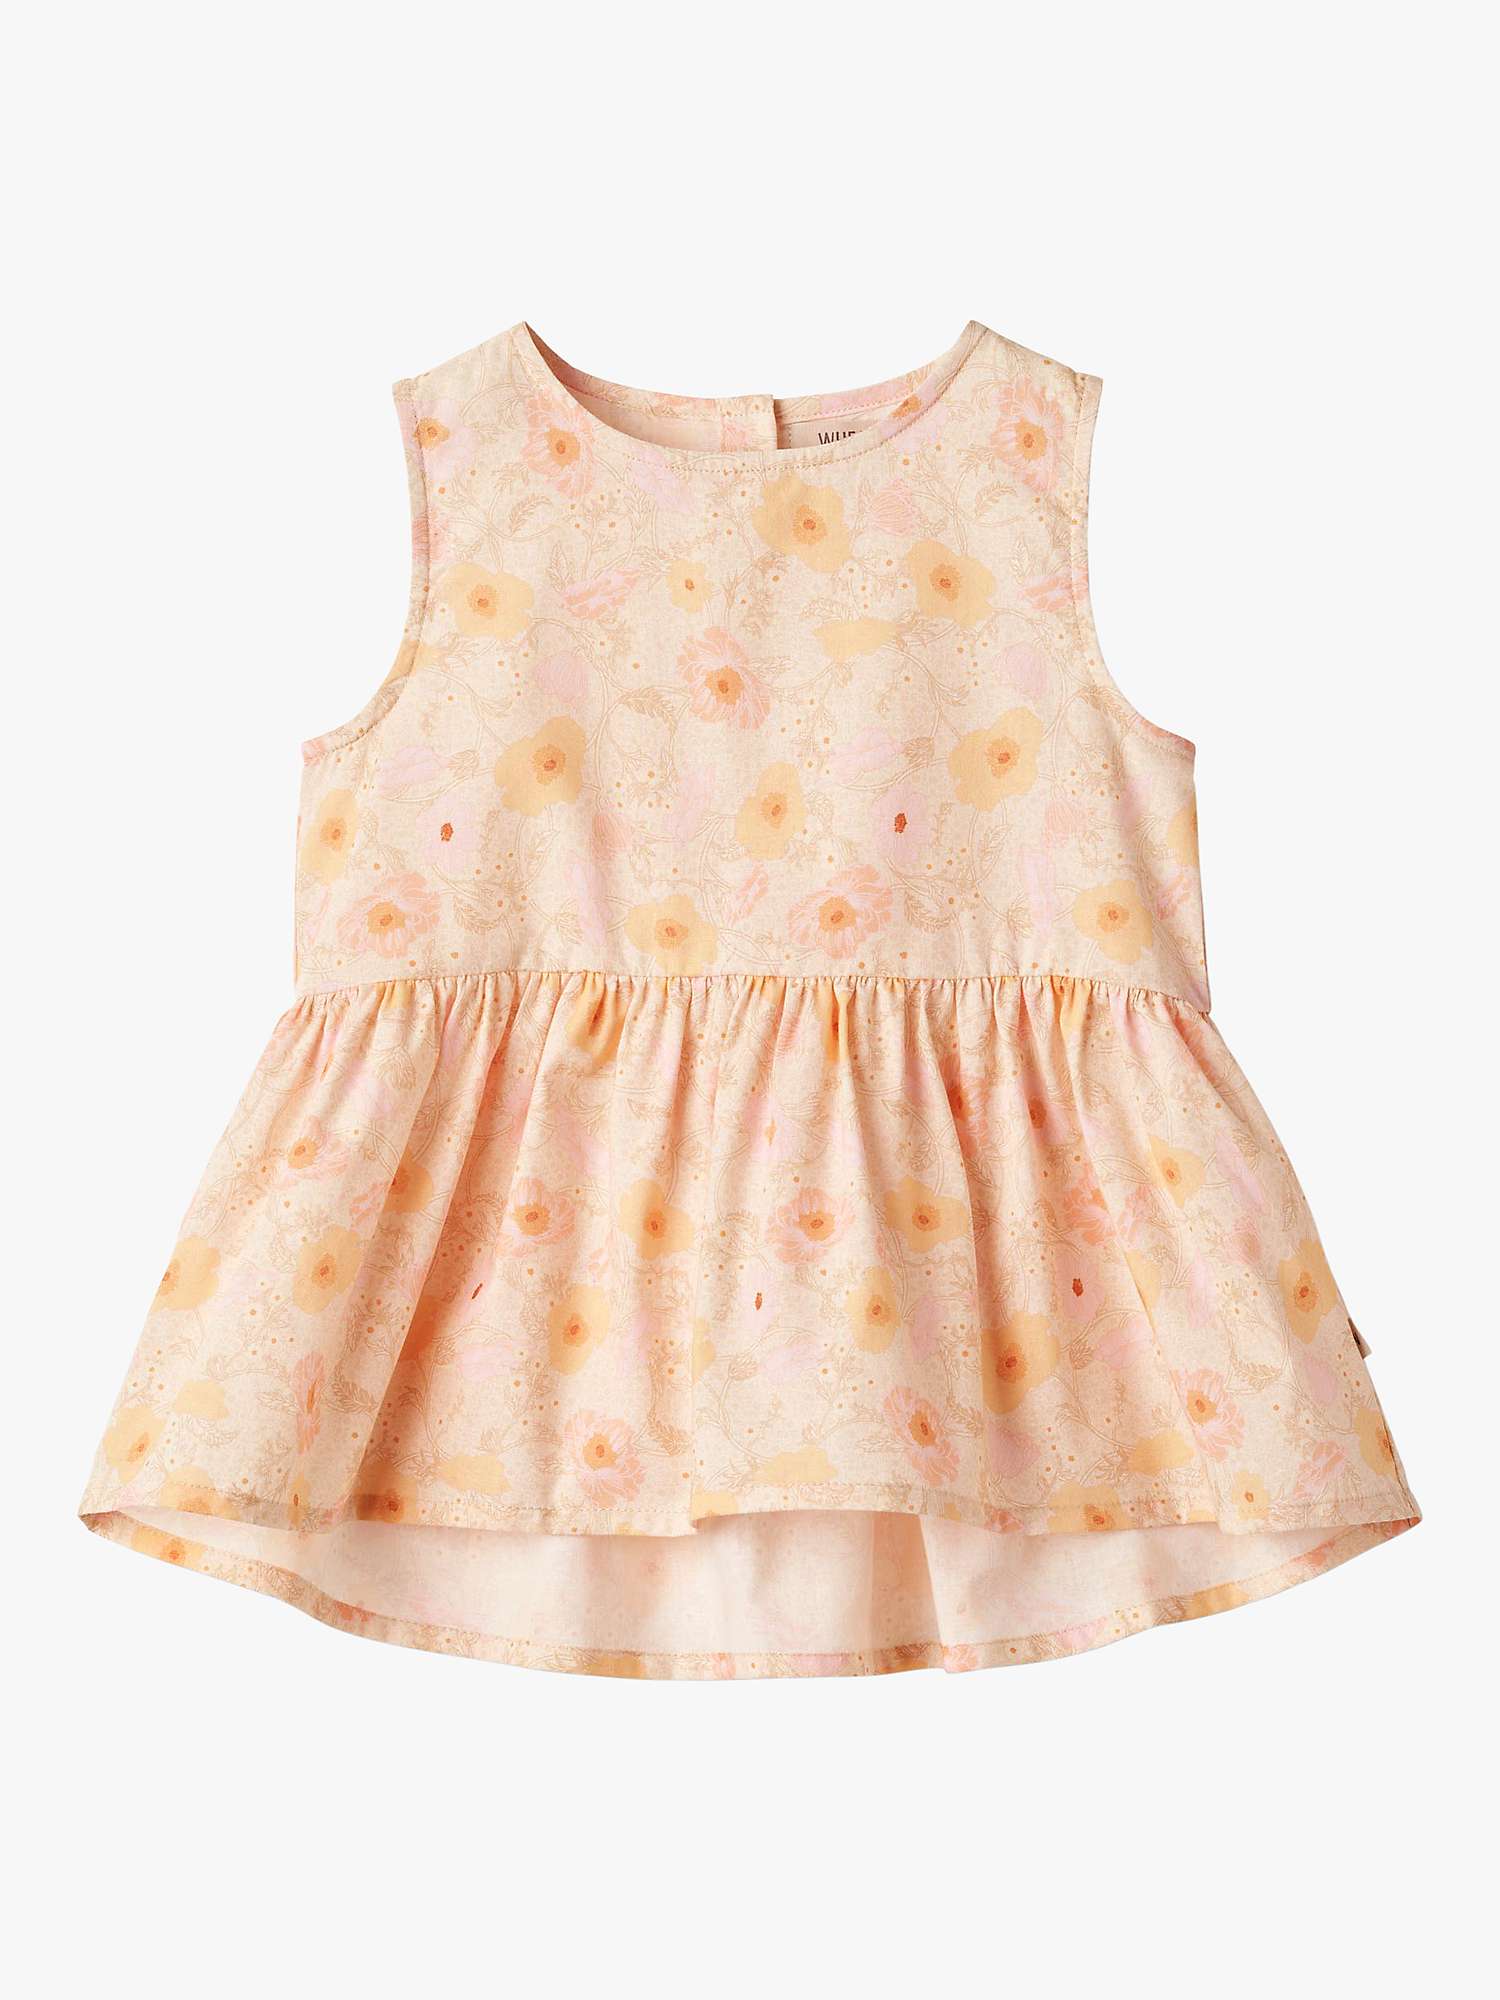 Buy WHEAT Kids' Bea Floral Top, Peach Online at johnlewis.com